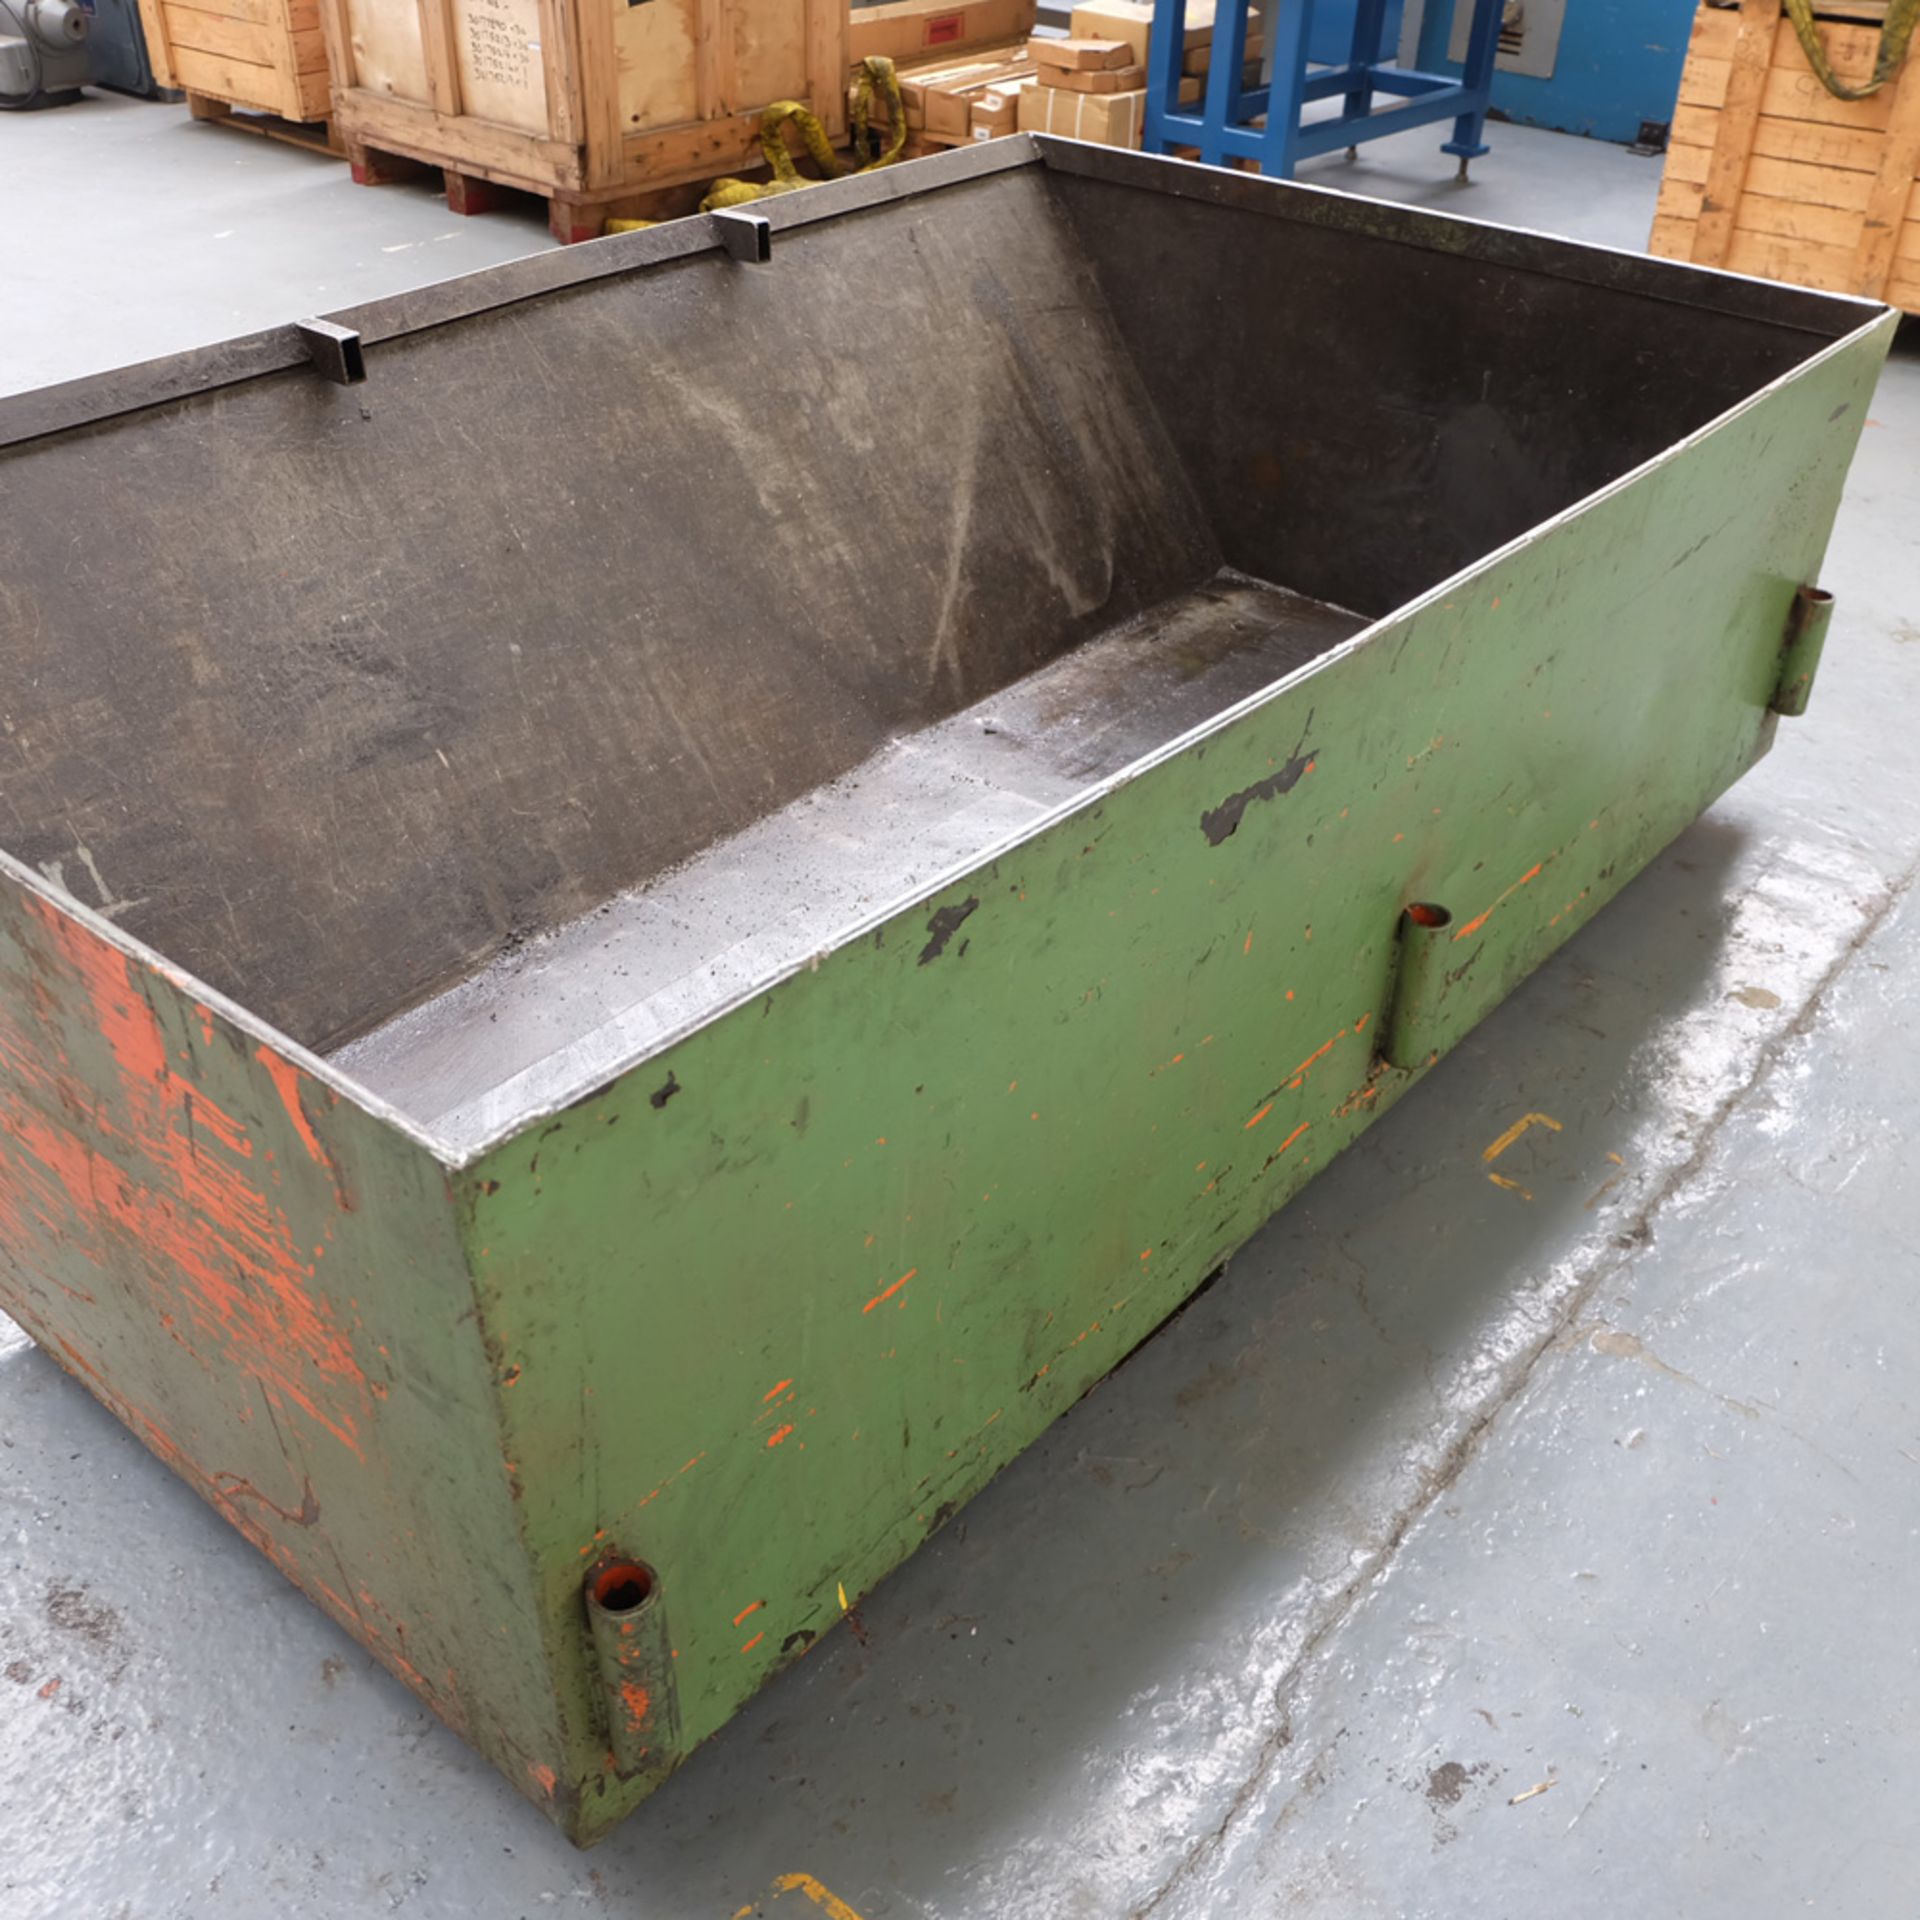 Edward Pearson Hydraulic Power Guillotine. Capacity 6' x 1/4". - Image 10 of 10